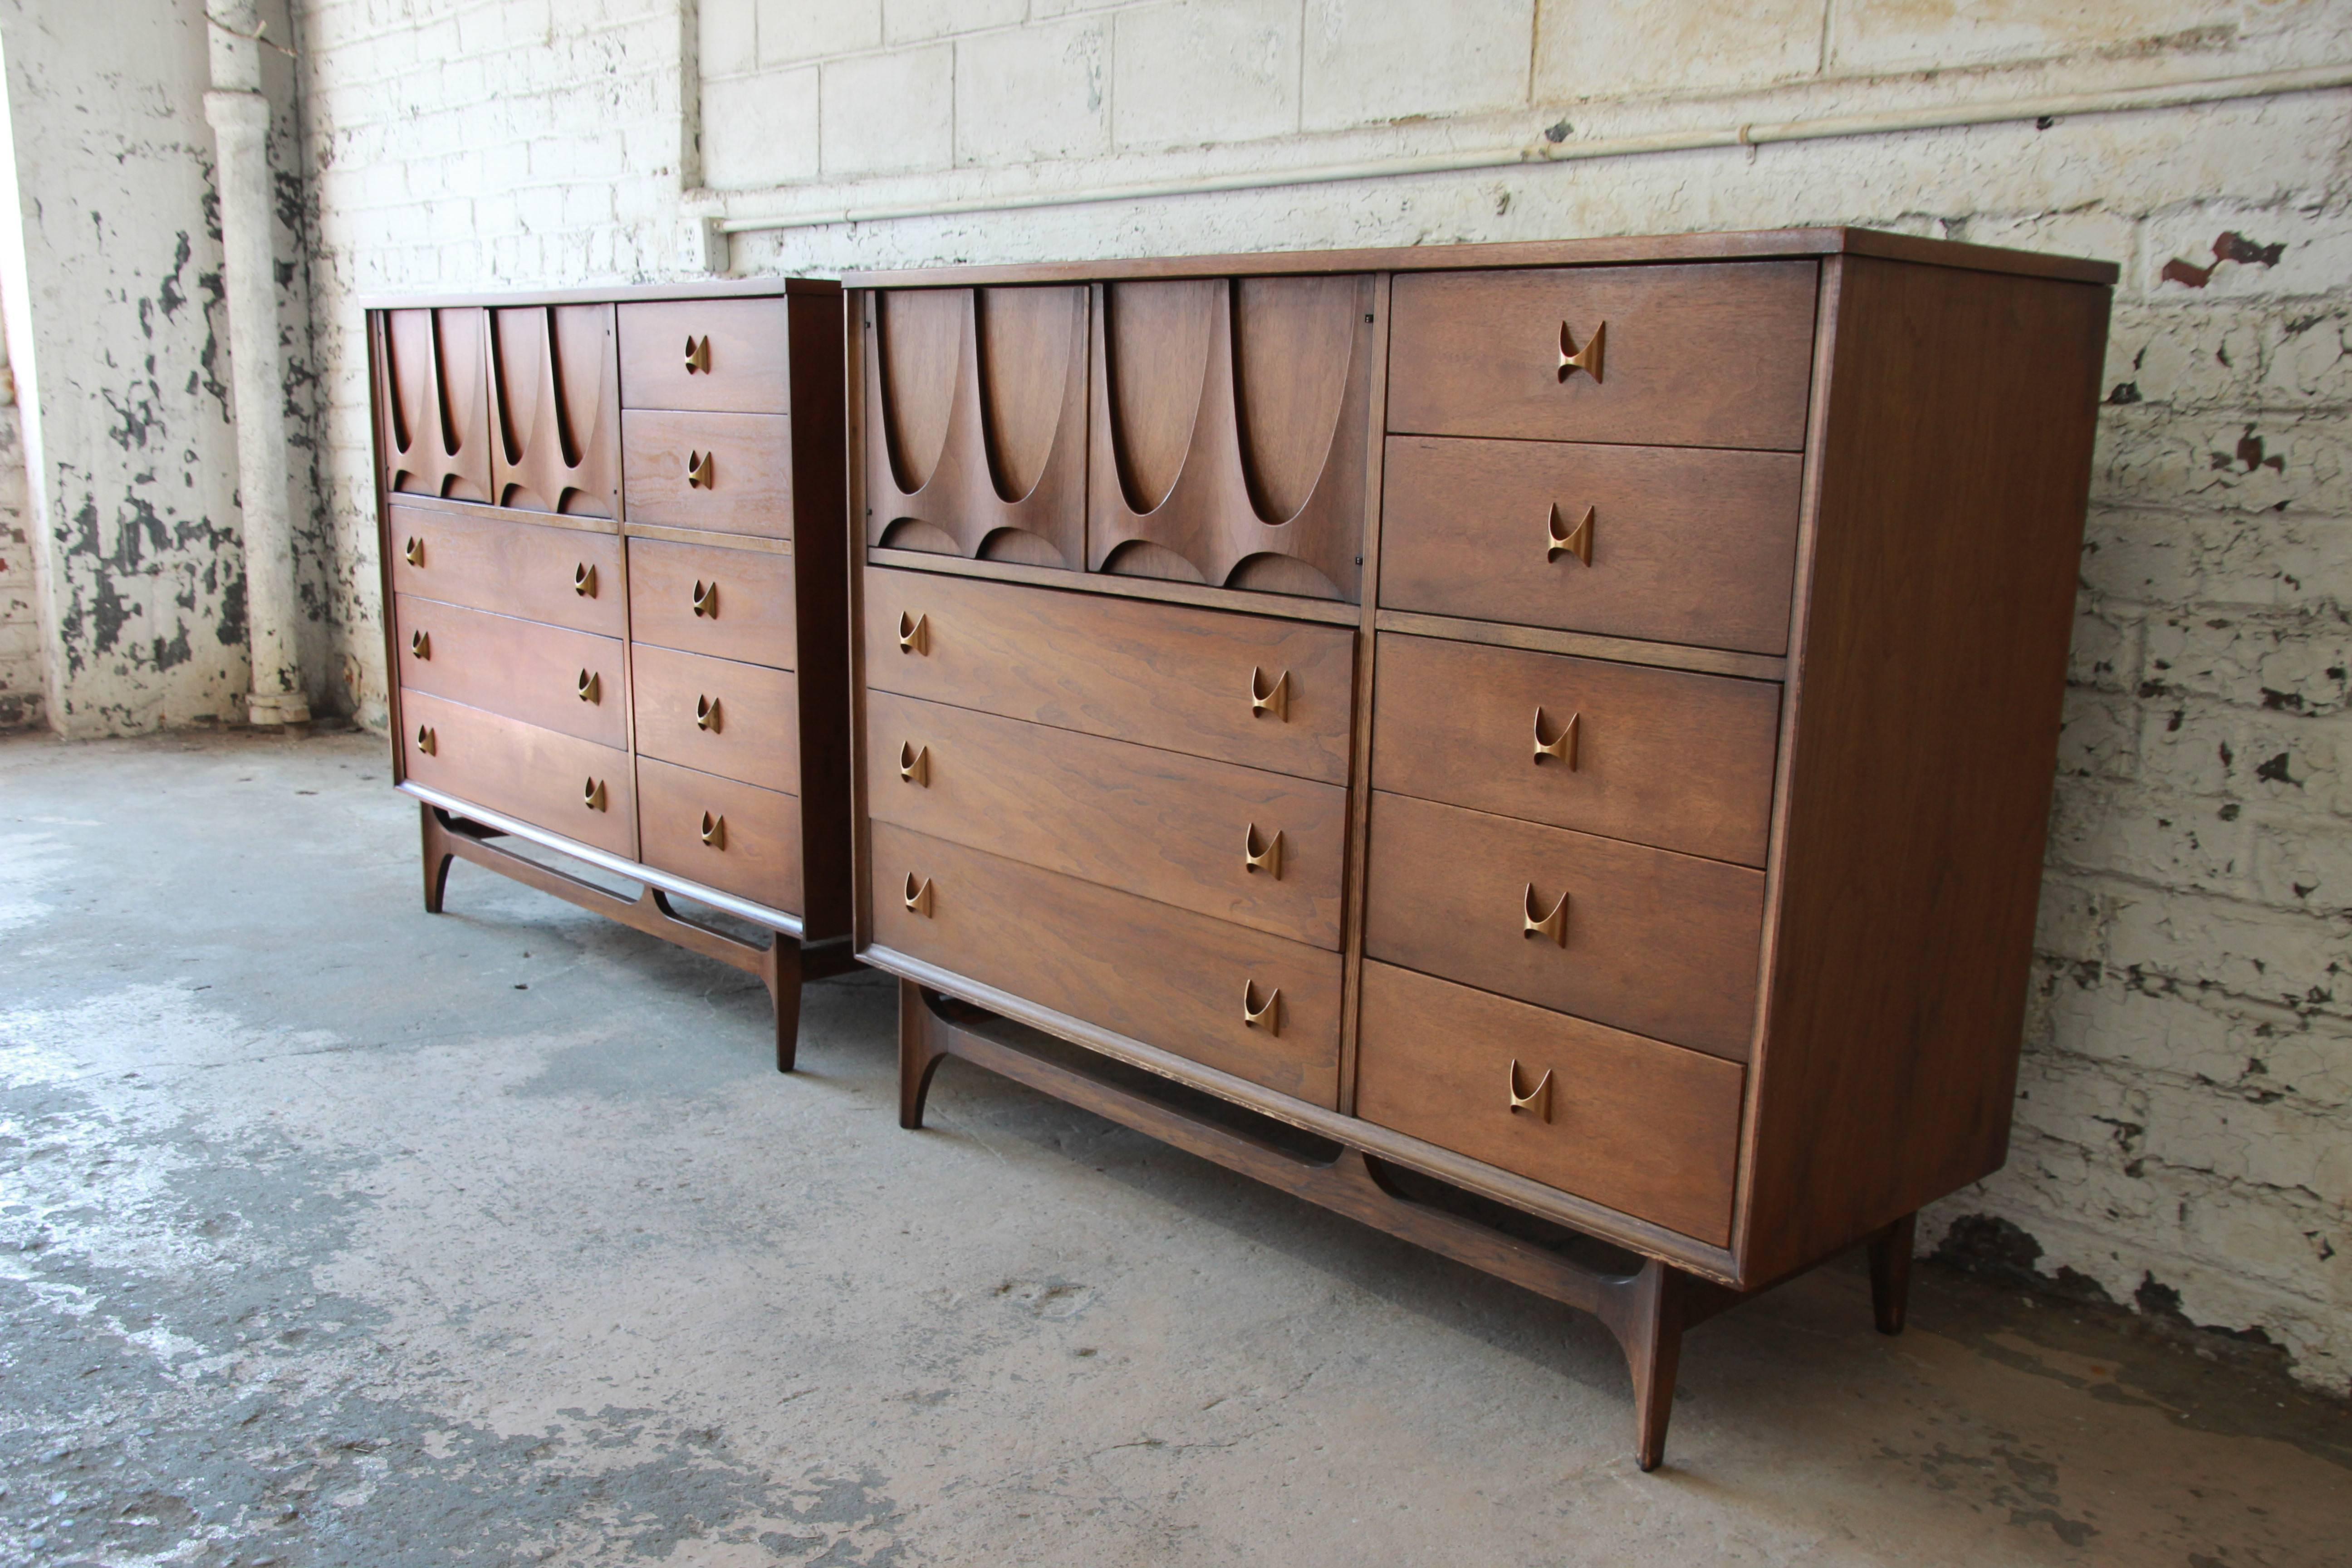 An outstanding Mid-Century Modern walnut highboy dresser or chest of drawers from the Broyhill Brasilia line, circa 1960s. The chest features eight dovetailed drawers with signature brass handles. Includes open storage with two dividers behind